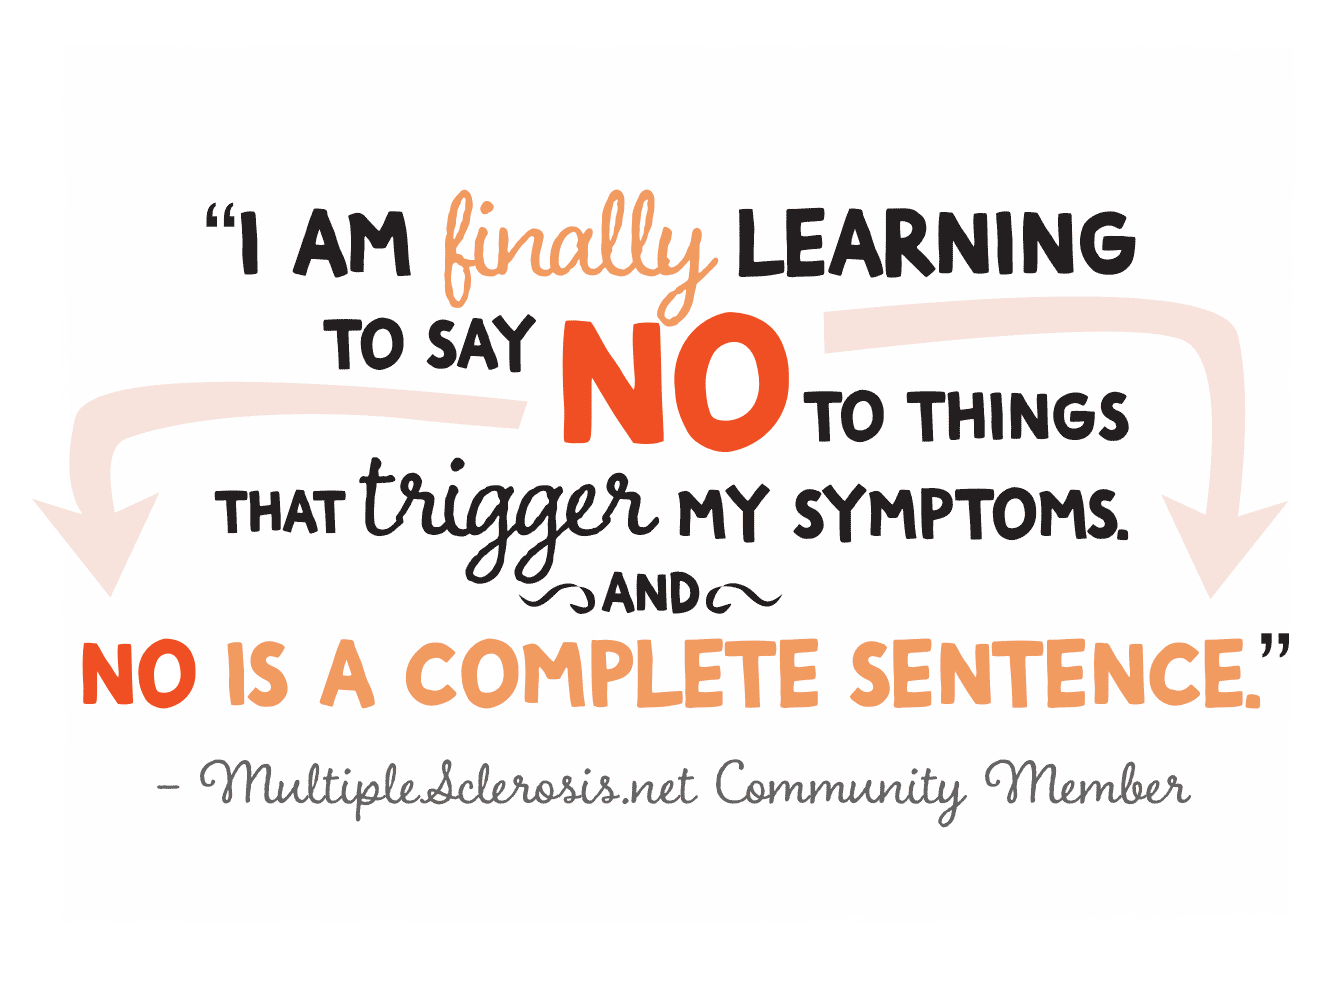 I am finally learning to say no to things that trigger my symptoms and no is a complete sentence. - Multiplesclerosis.net community member